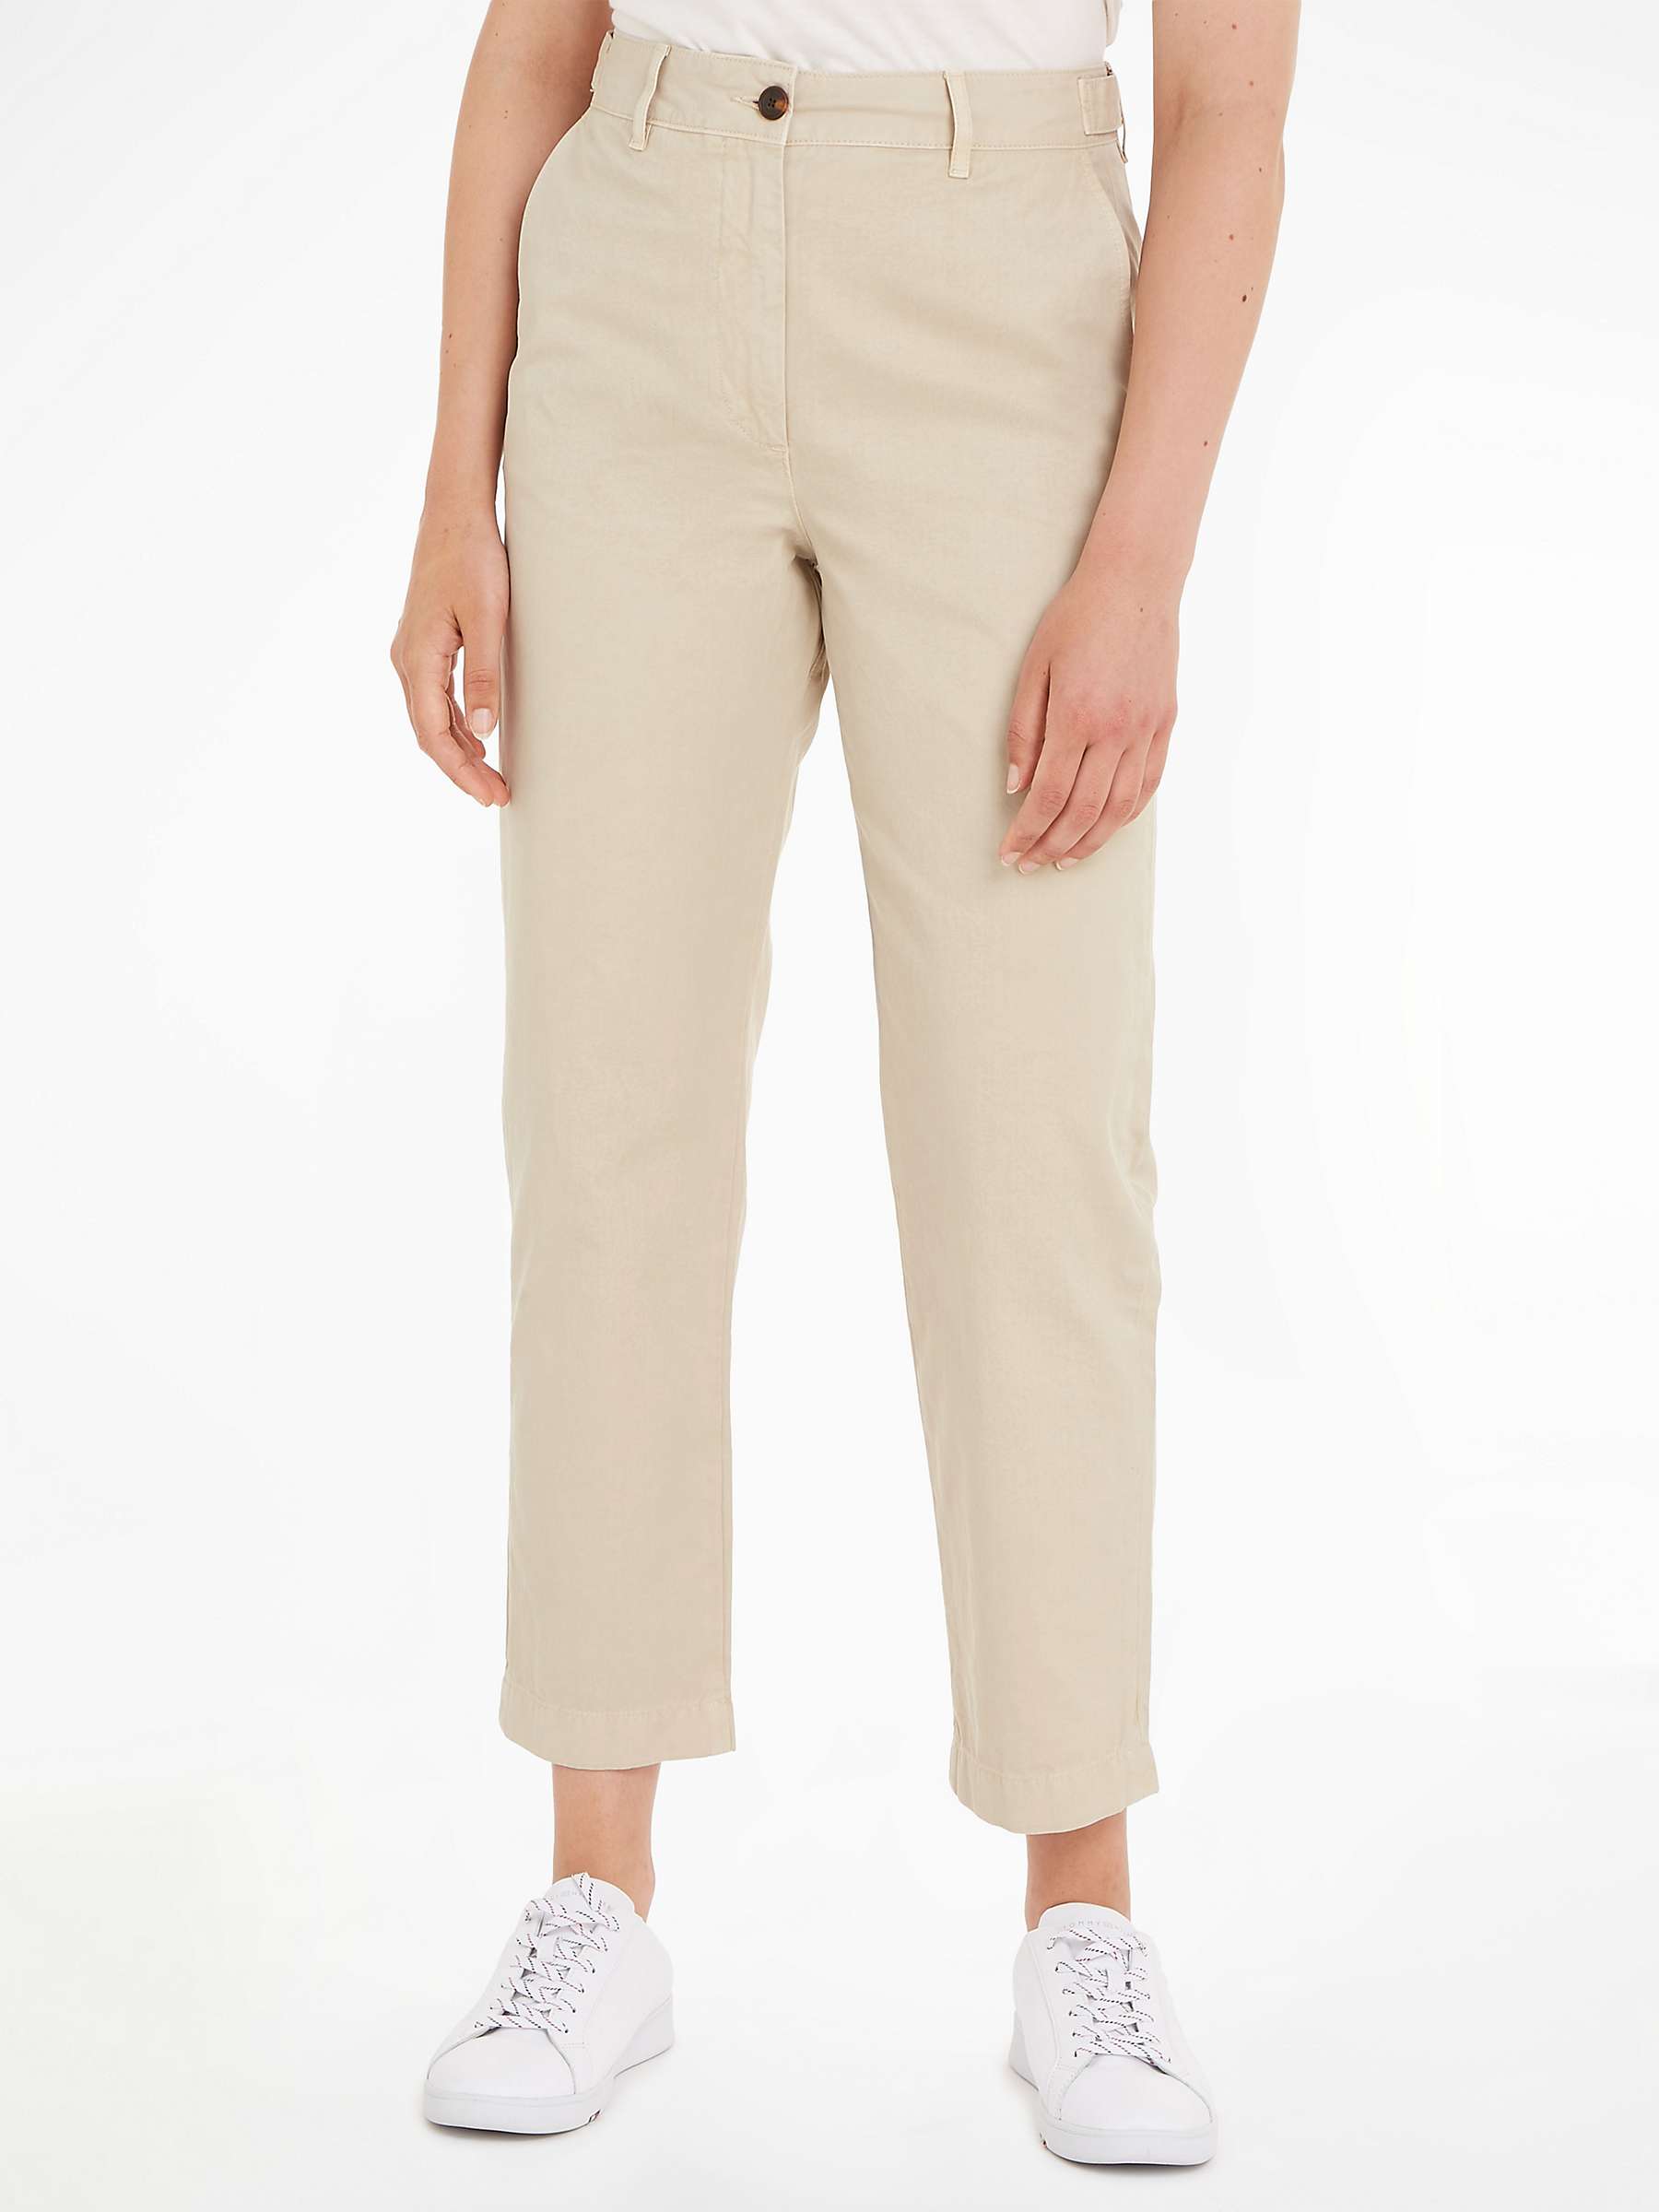 Buy Tommy Hilfiger Tapered Chino Trousers, Light Sandalwood Online at johnlewis.com